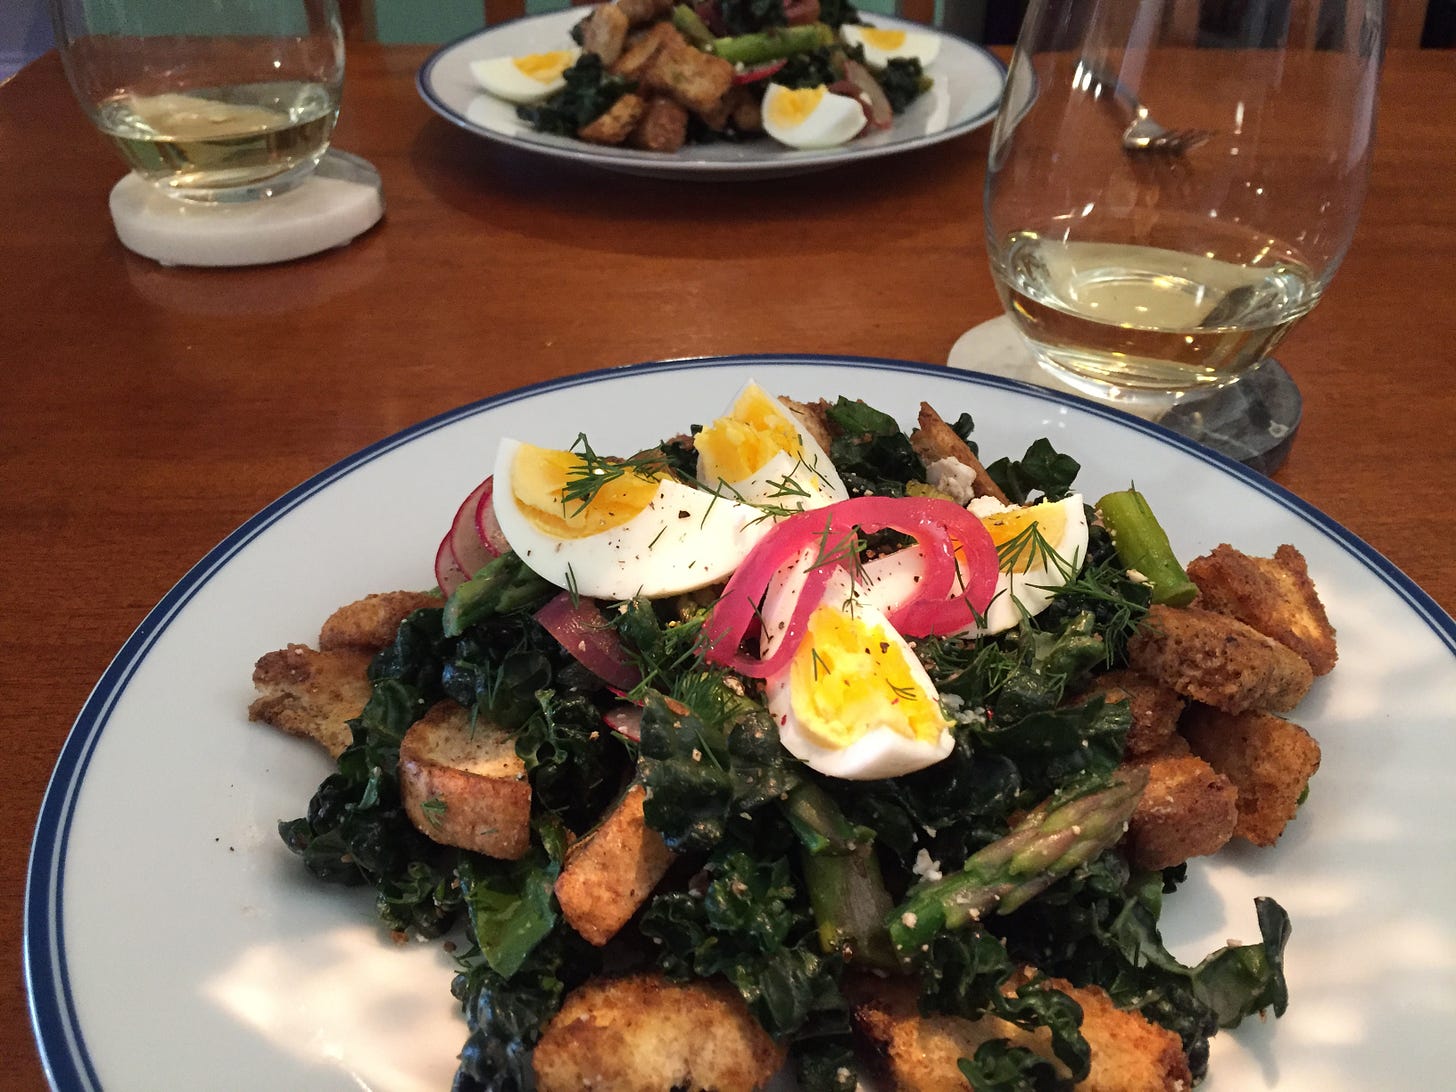 A pair of plates sit on a wooden table, each with large kale salad with croutons and asparagus, flecked with dill and bright pink pickled onions, and a boiled egg cut into quarters rests on top. Two stemless glasses of white wine sit on coasters next to the plates.